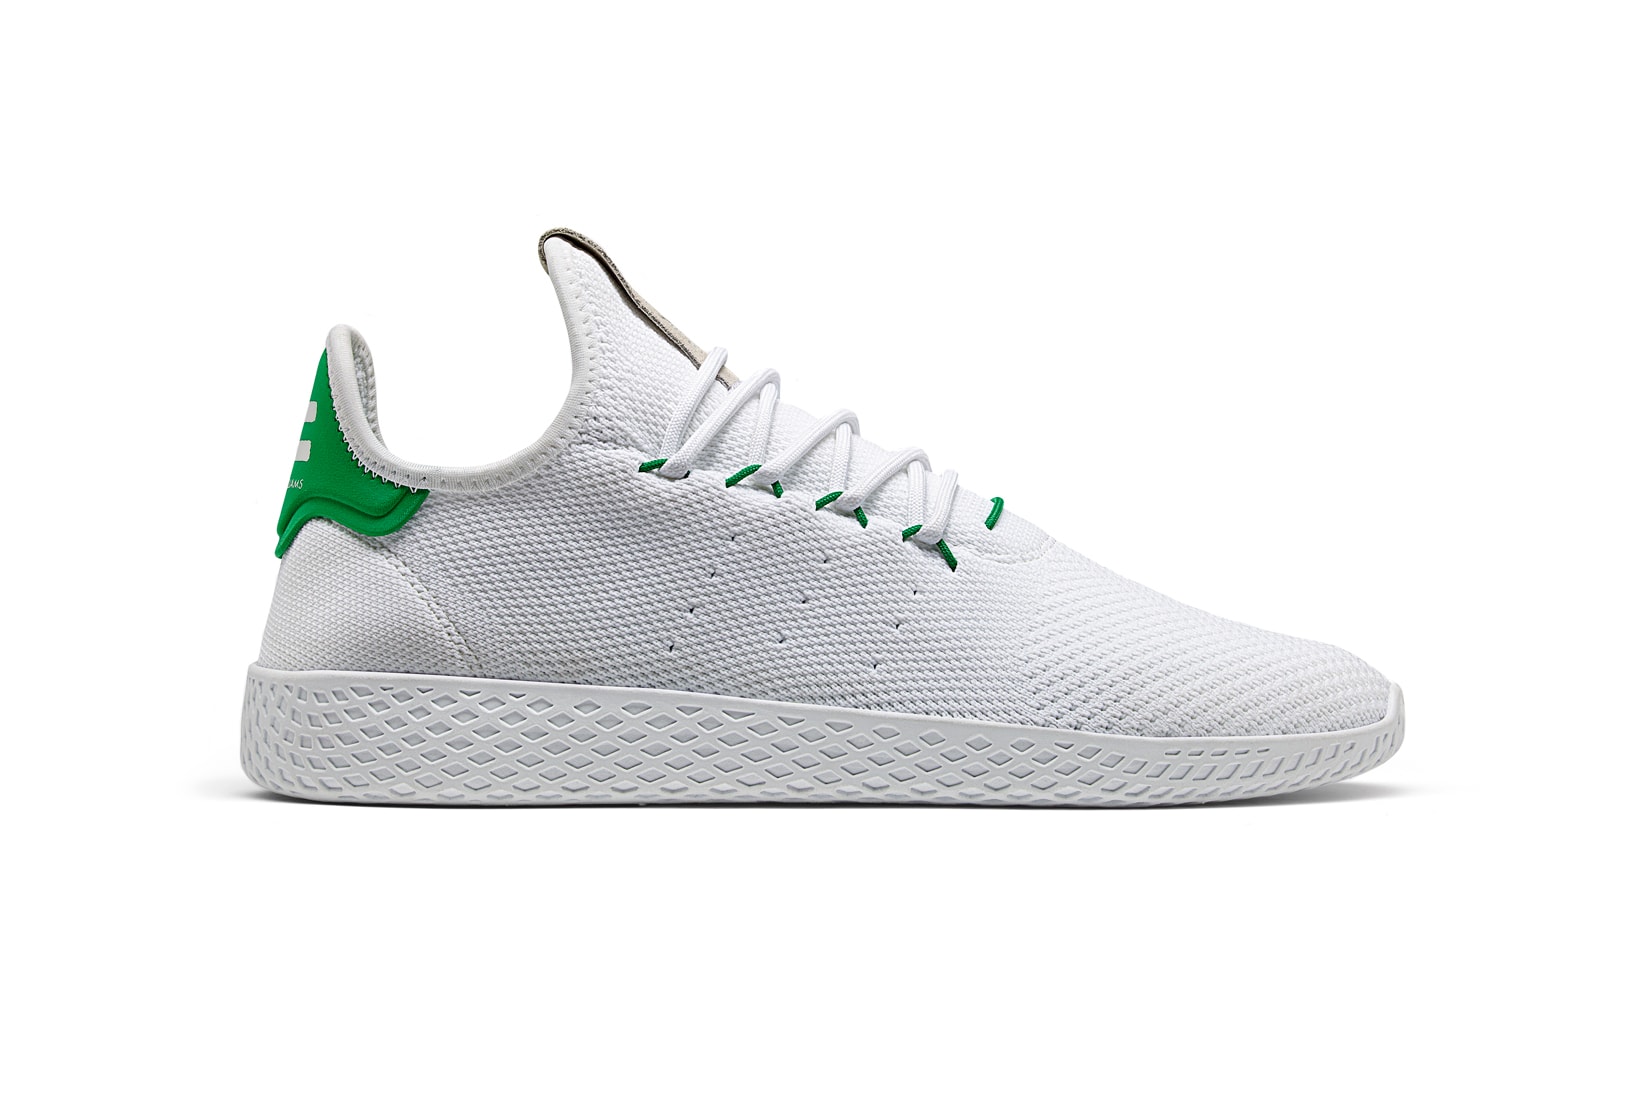 adidas Mens Pharrell Williams Tennis Hu Shoes in Black and White